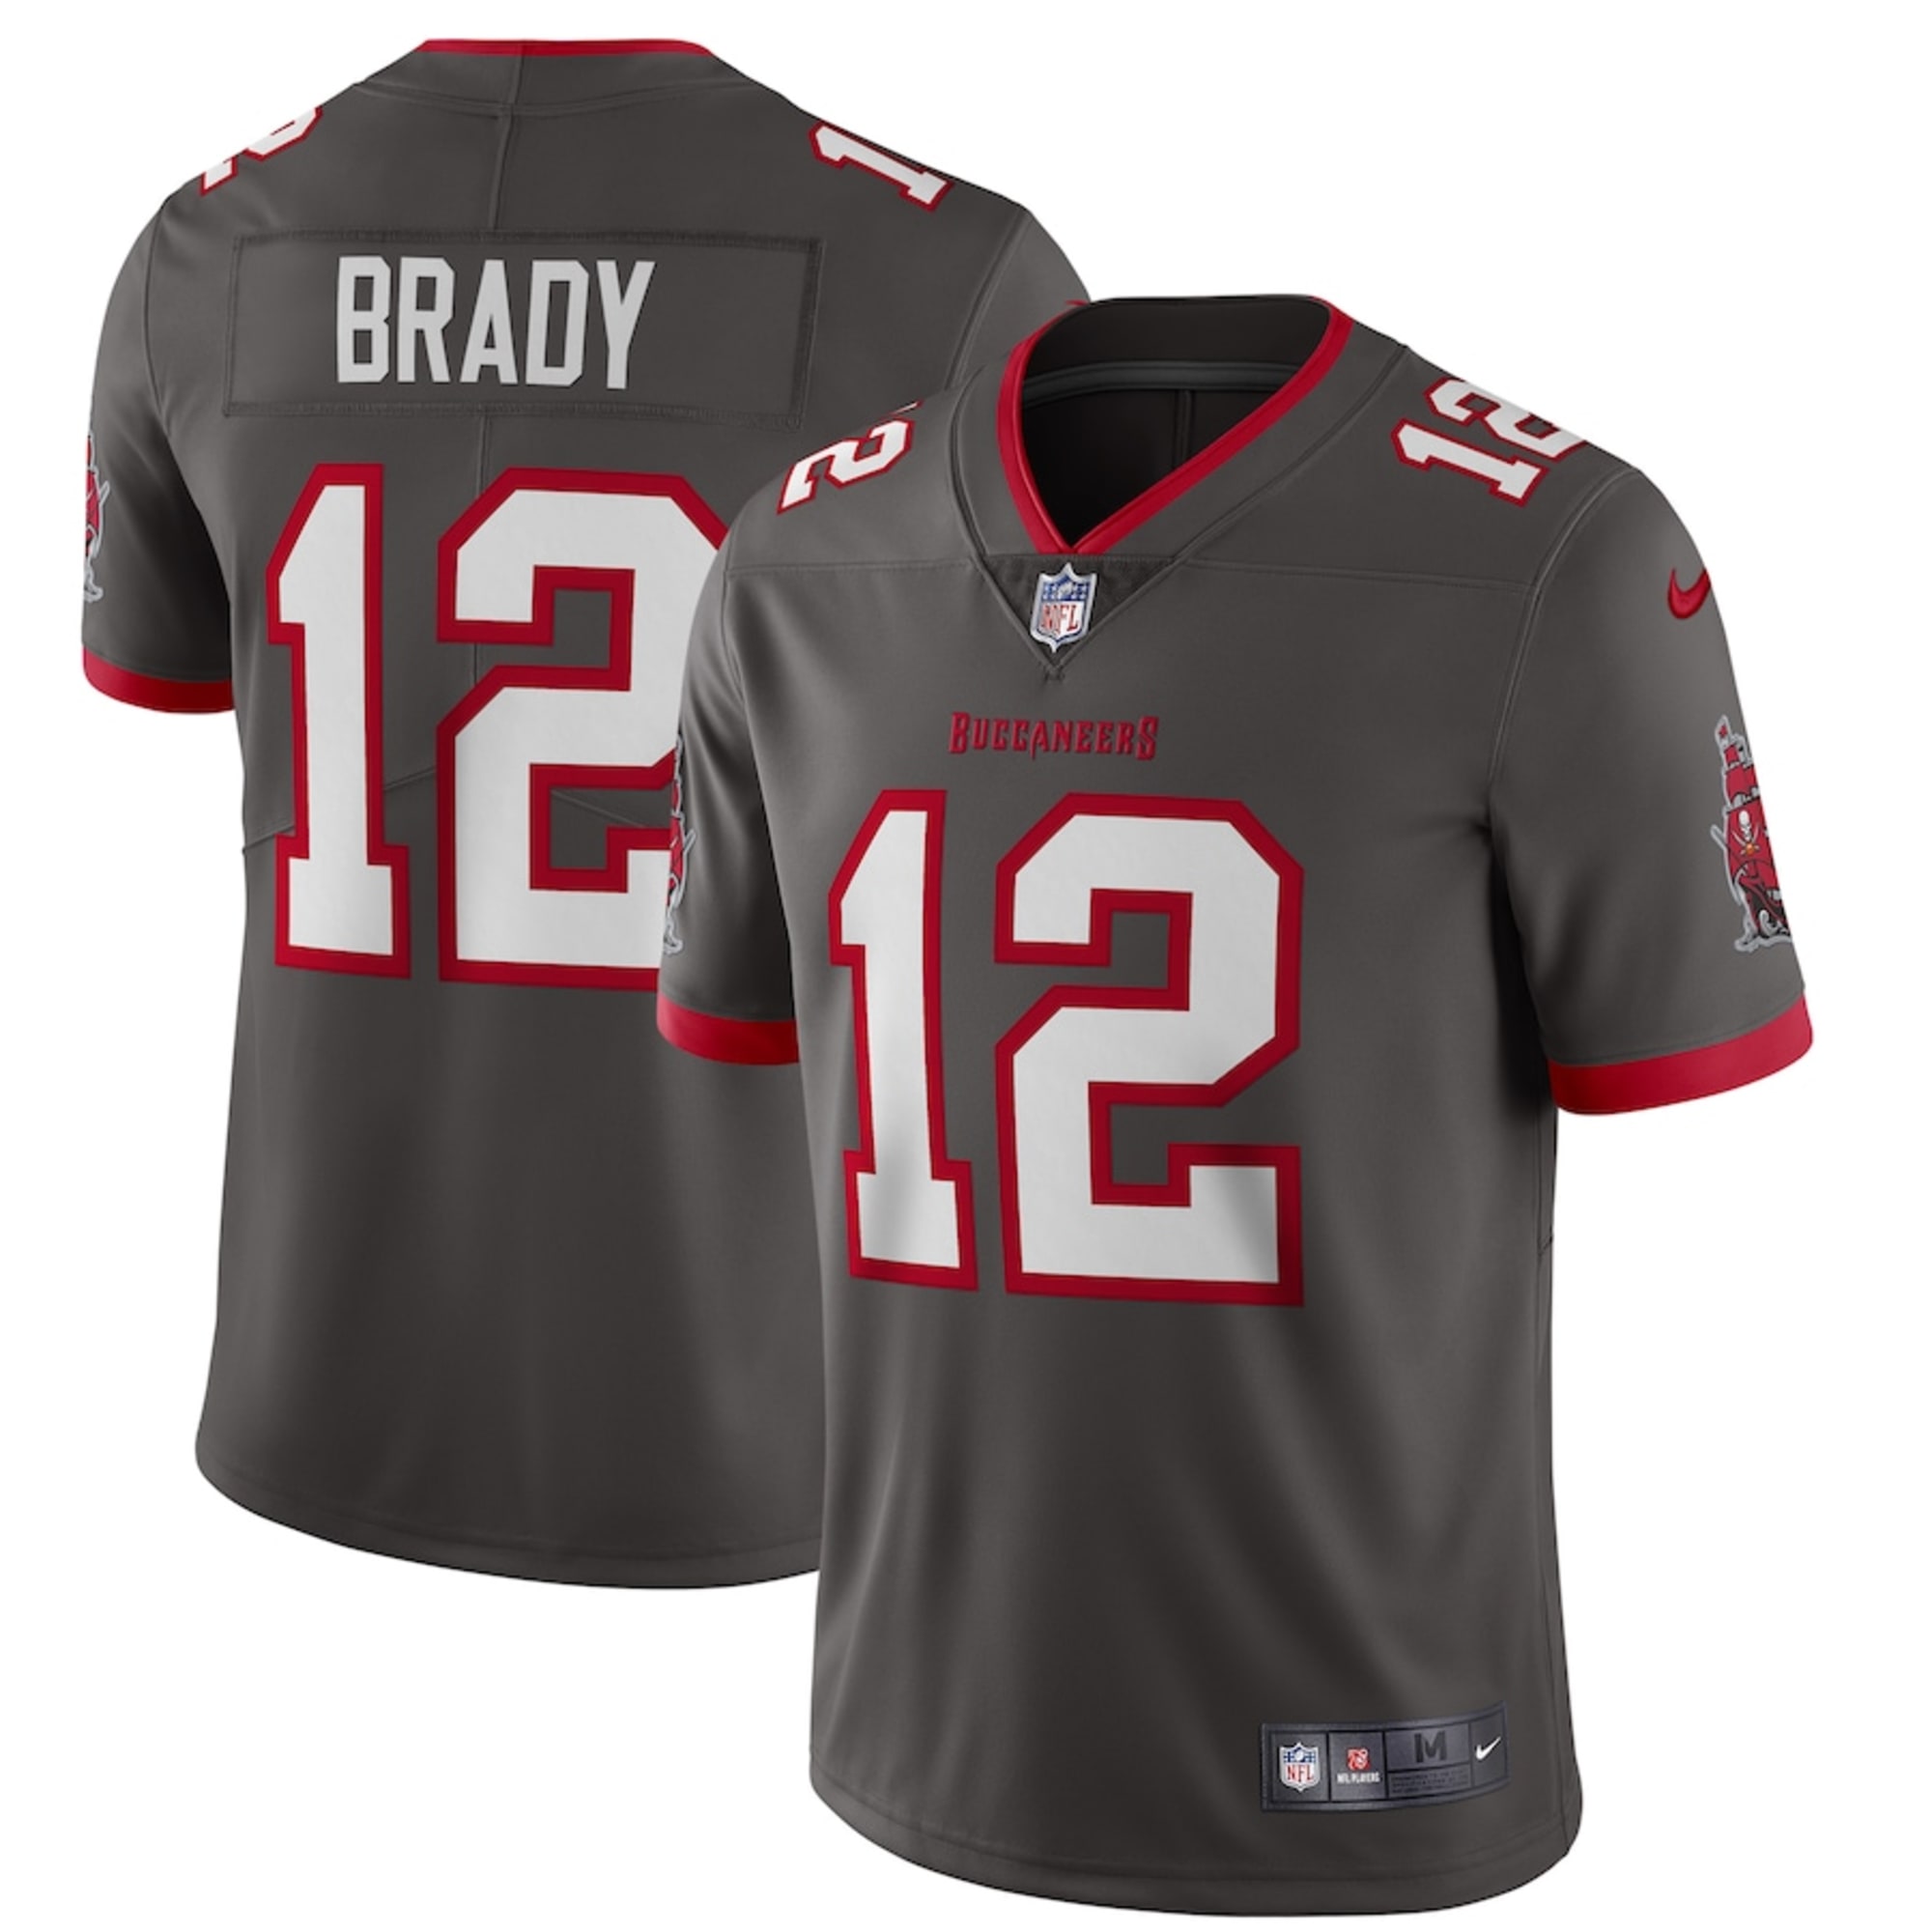 Tampa Bay Buccaneers reveal new jersey, get your Tom Brady gear now